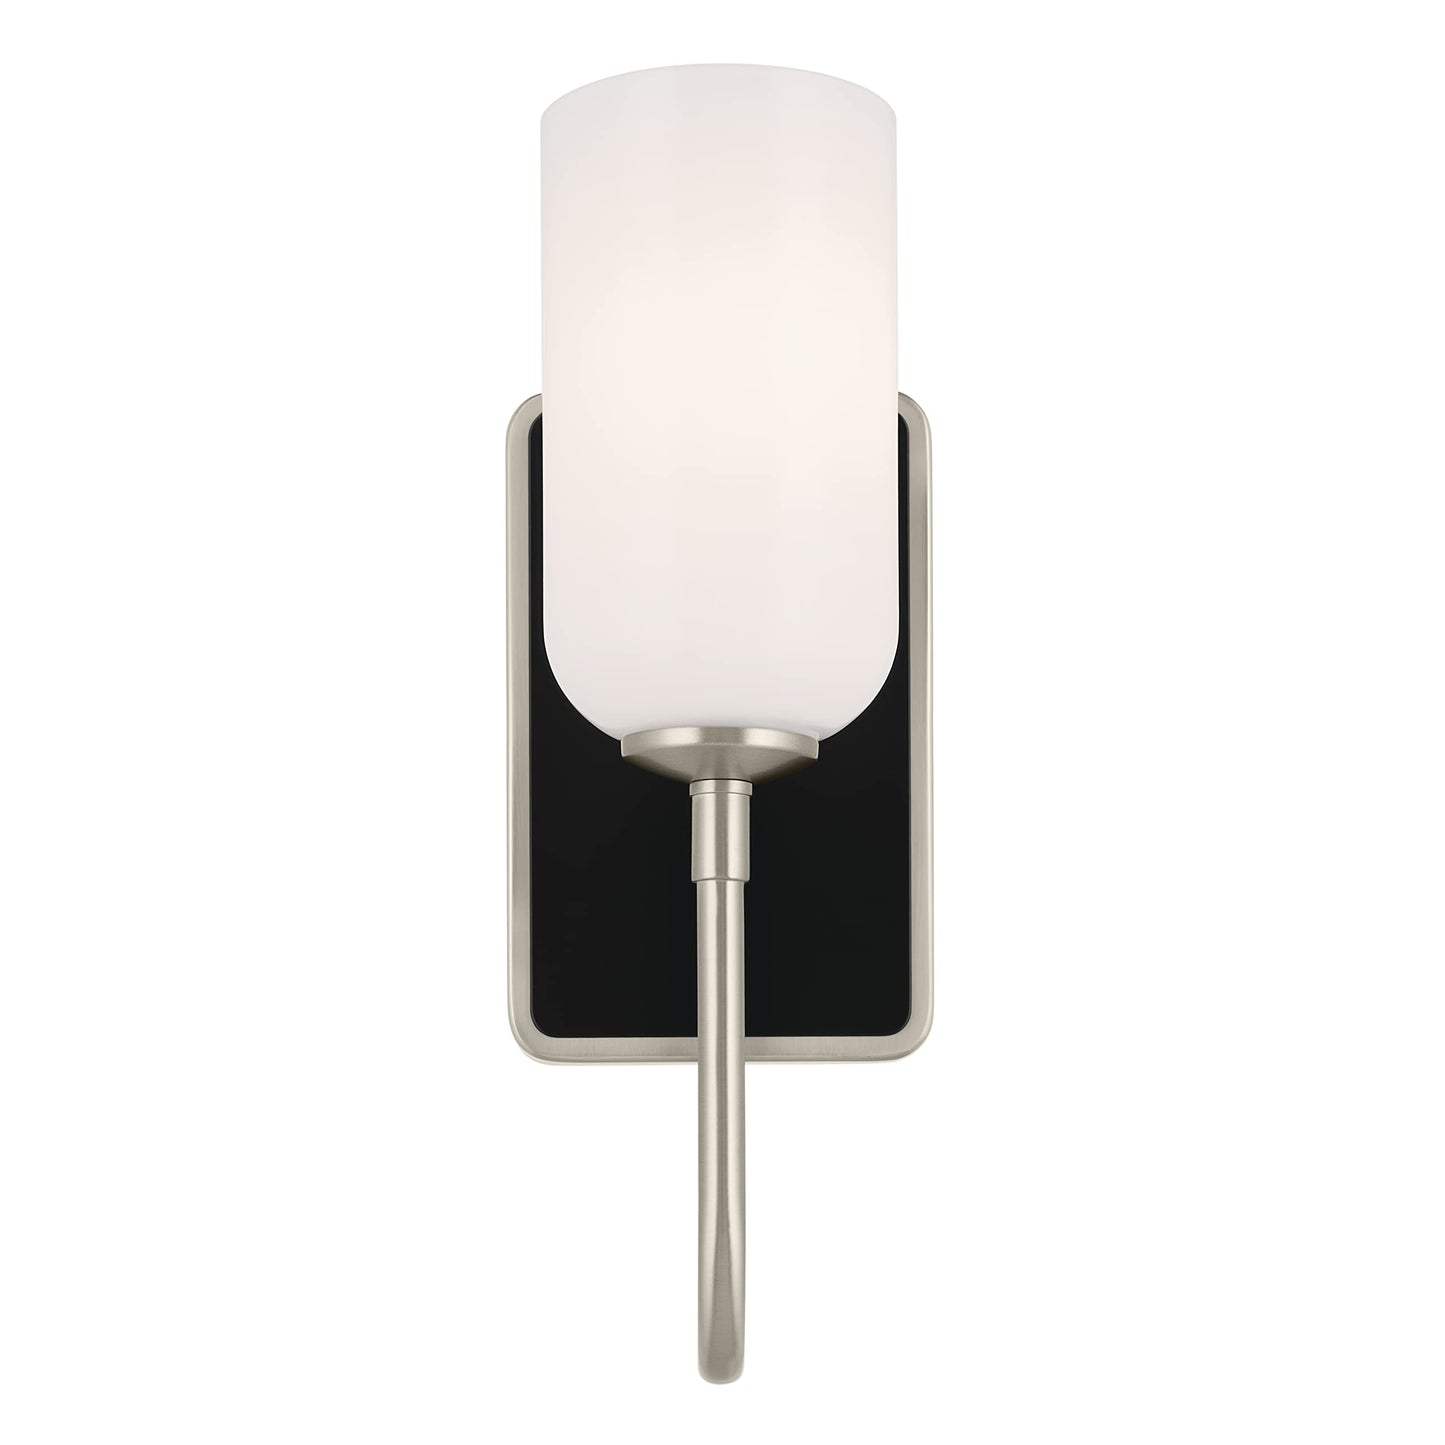 Kichler Solia 13.5 Inch 1 Light Wall Sconce with Opal Glass in Brushed Nickel with Black